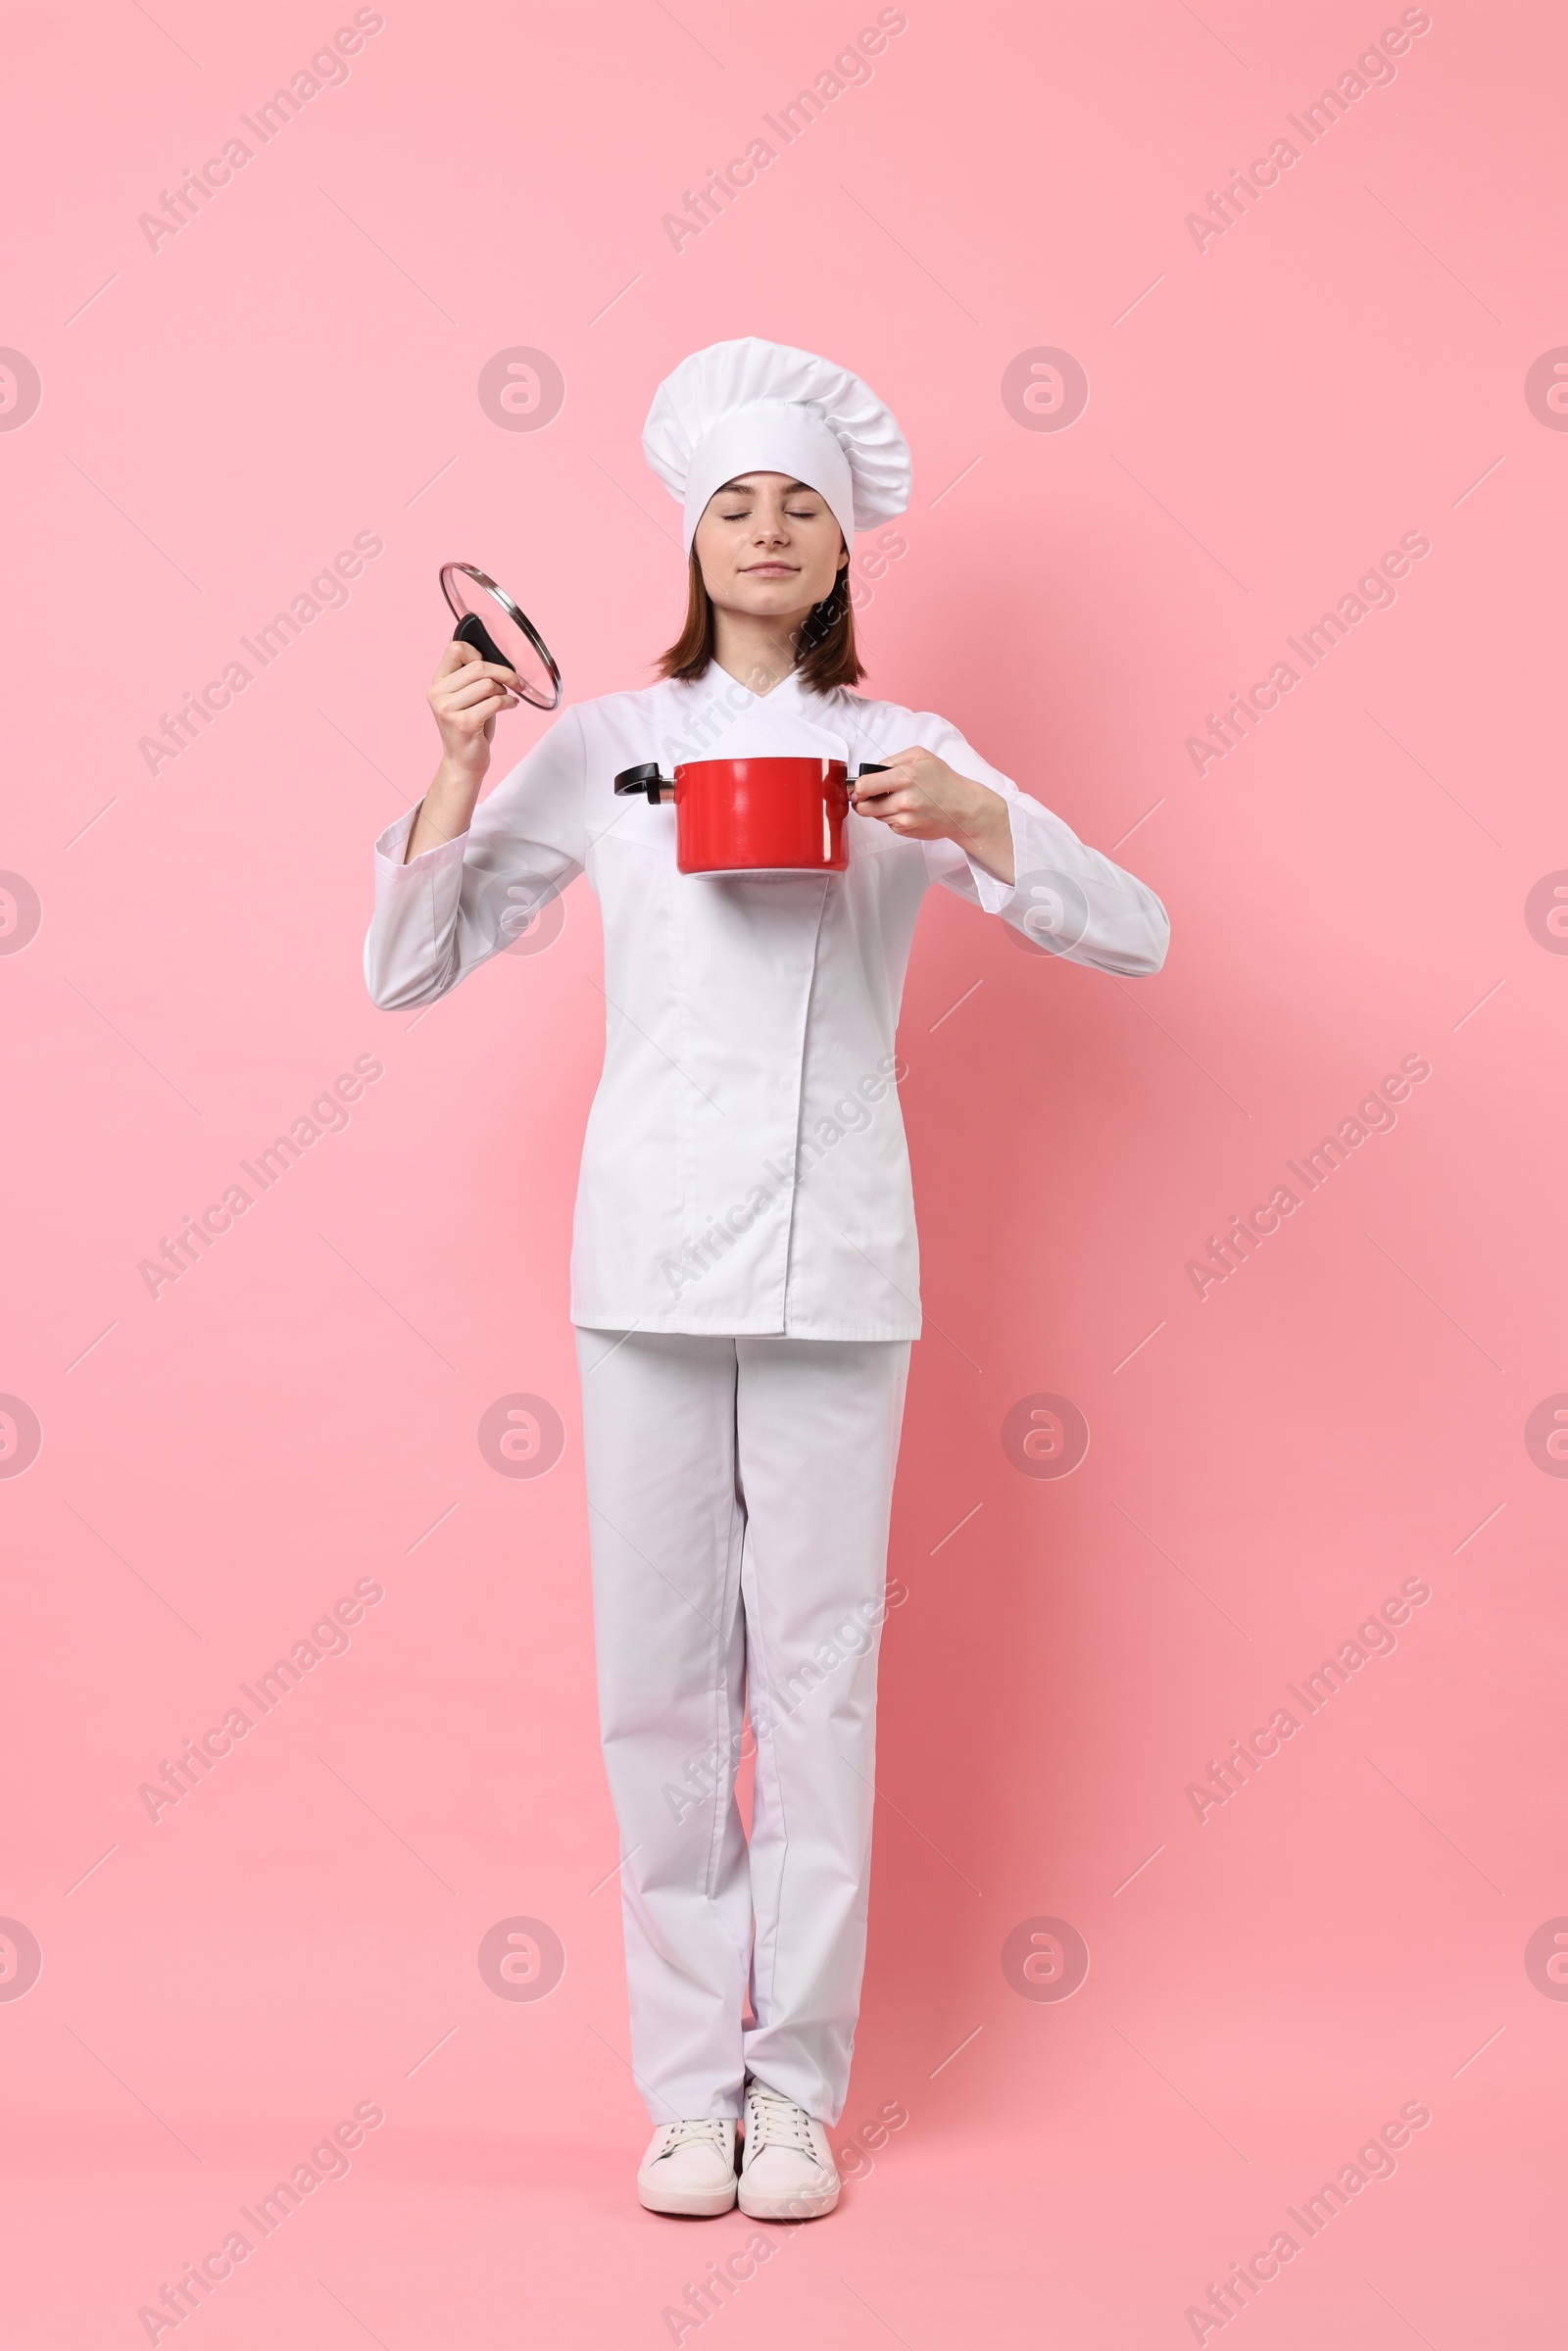 Photo of Professional chef with cooking pot on pink background